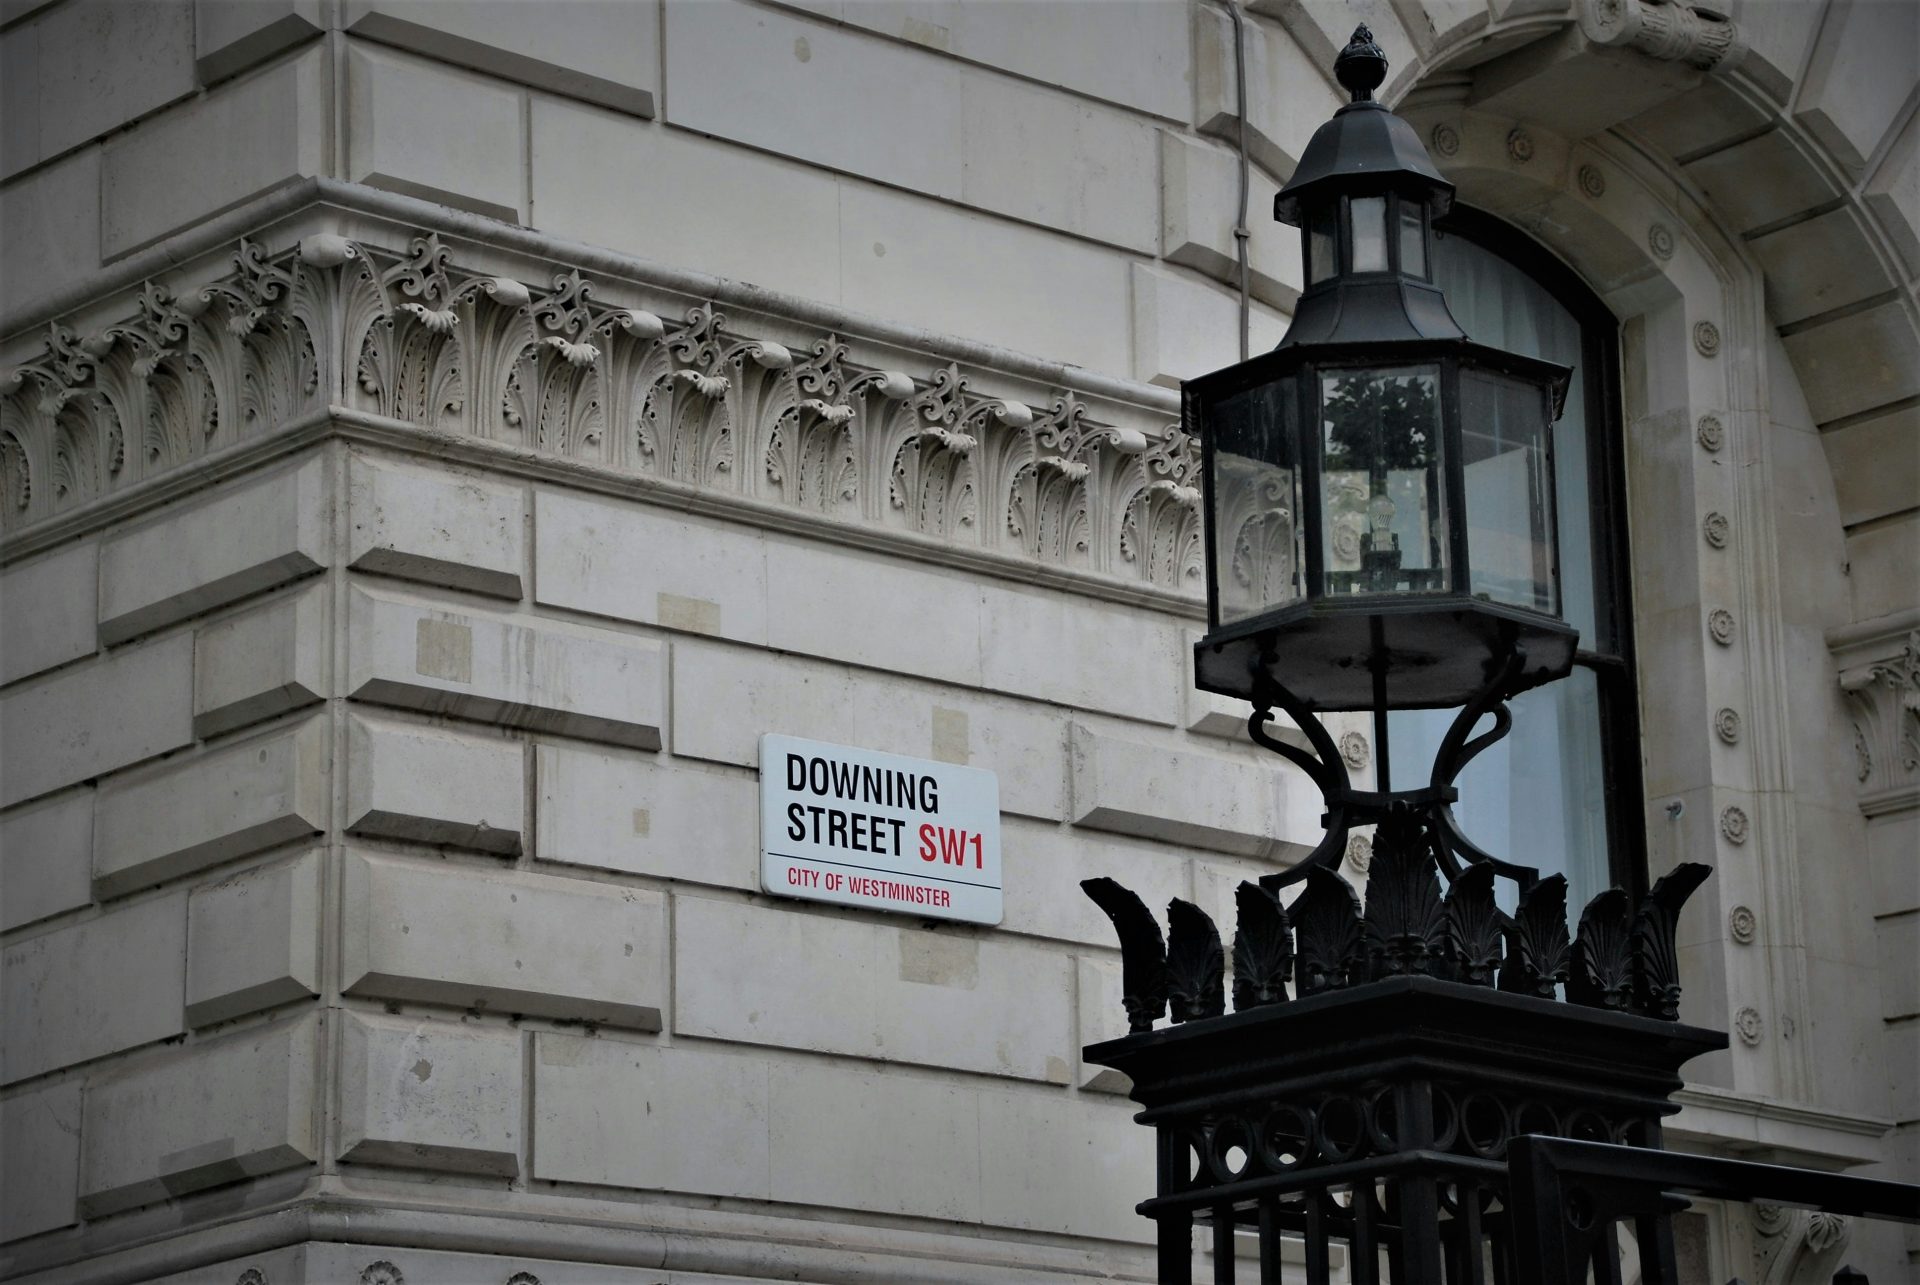 A street sign on a wall for Downing Street in London